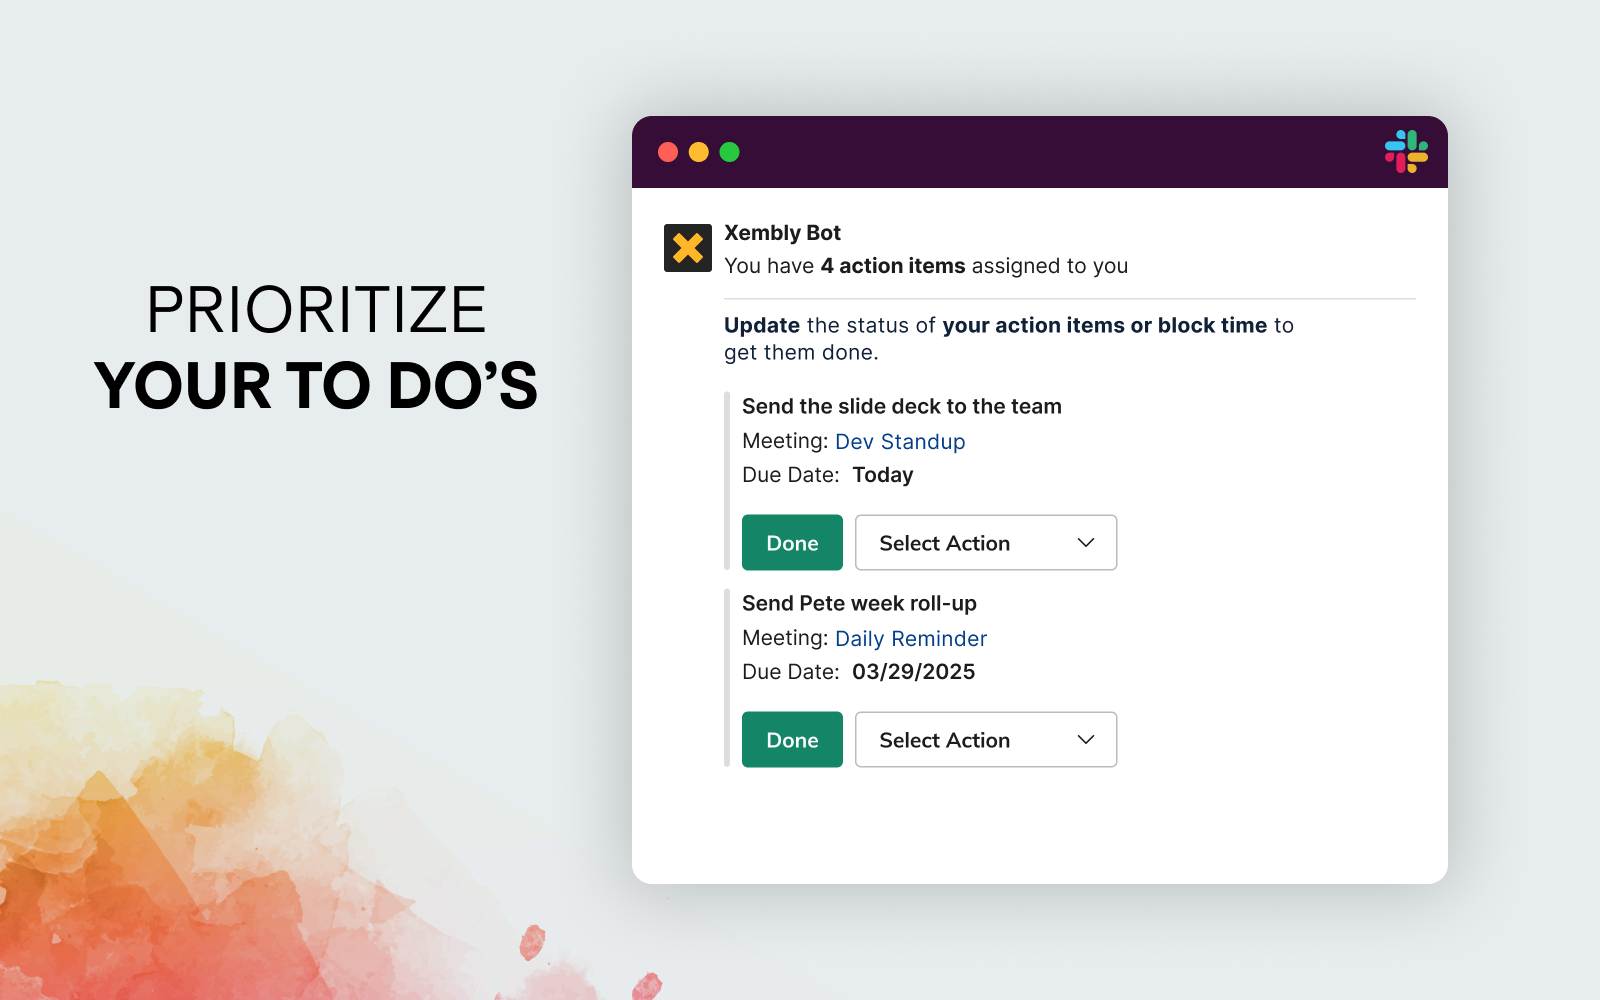 Prioritize your to-do's with automated Action Items from your meetings and Xembly's task management capabilities.